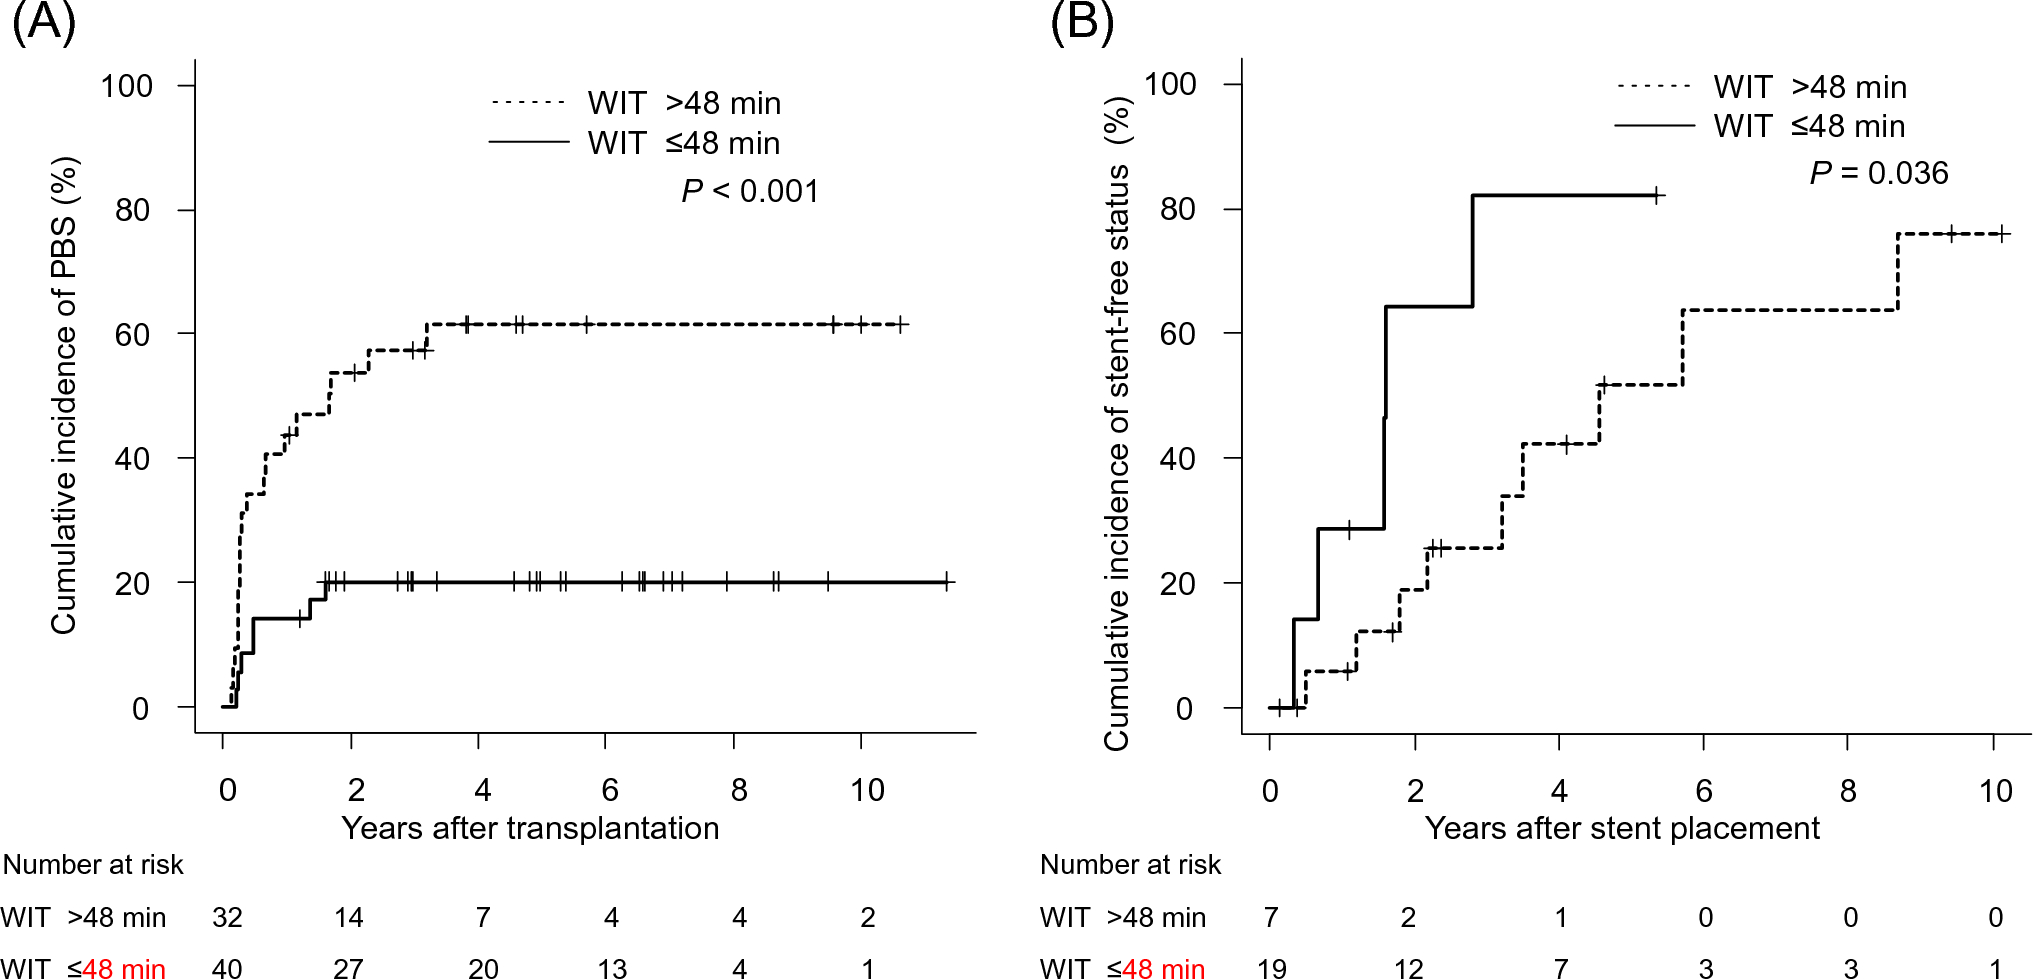 Prolonged warm ischemia time in the recipient is associated with post-transplant biliary stricture following living-donor liver transplantation